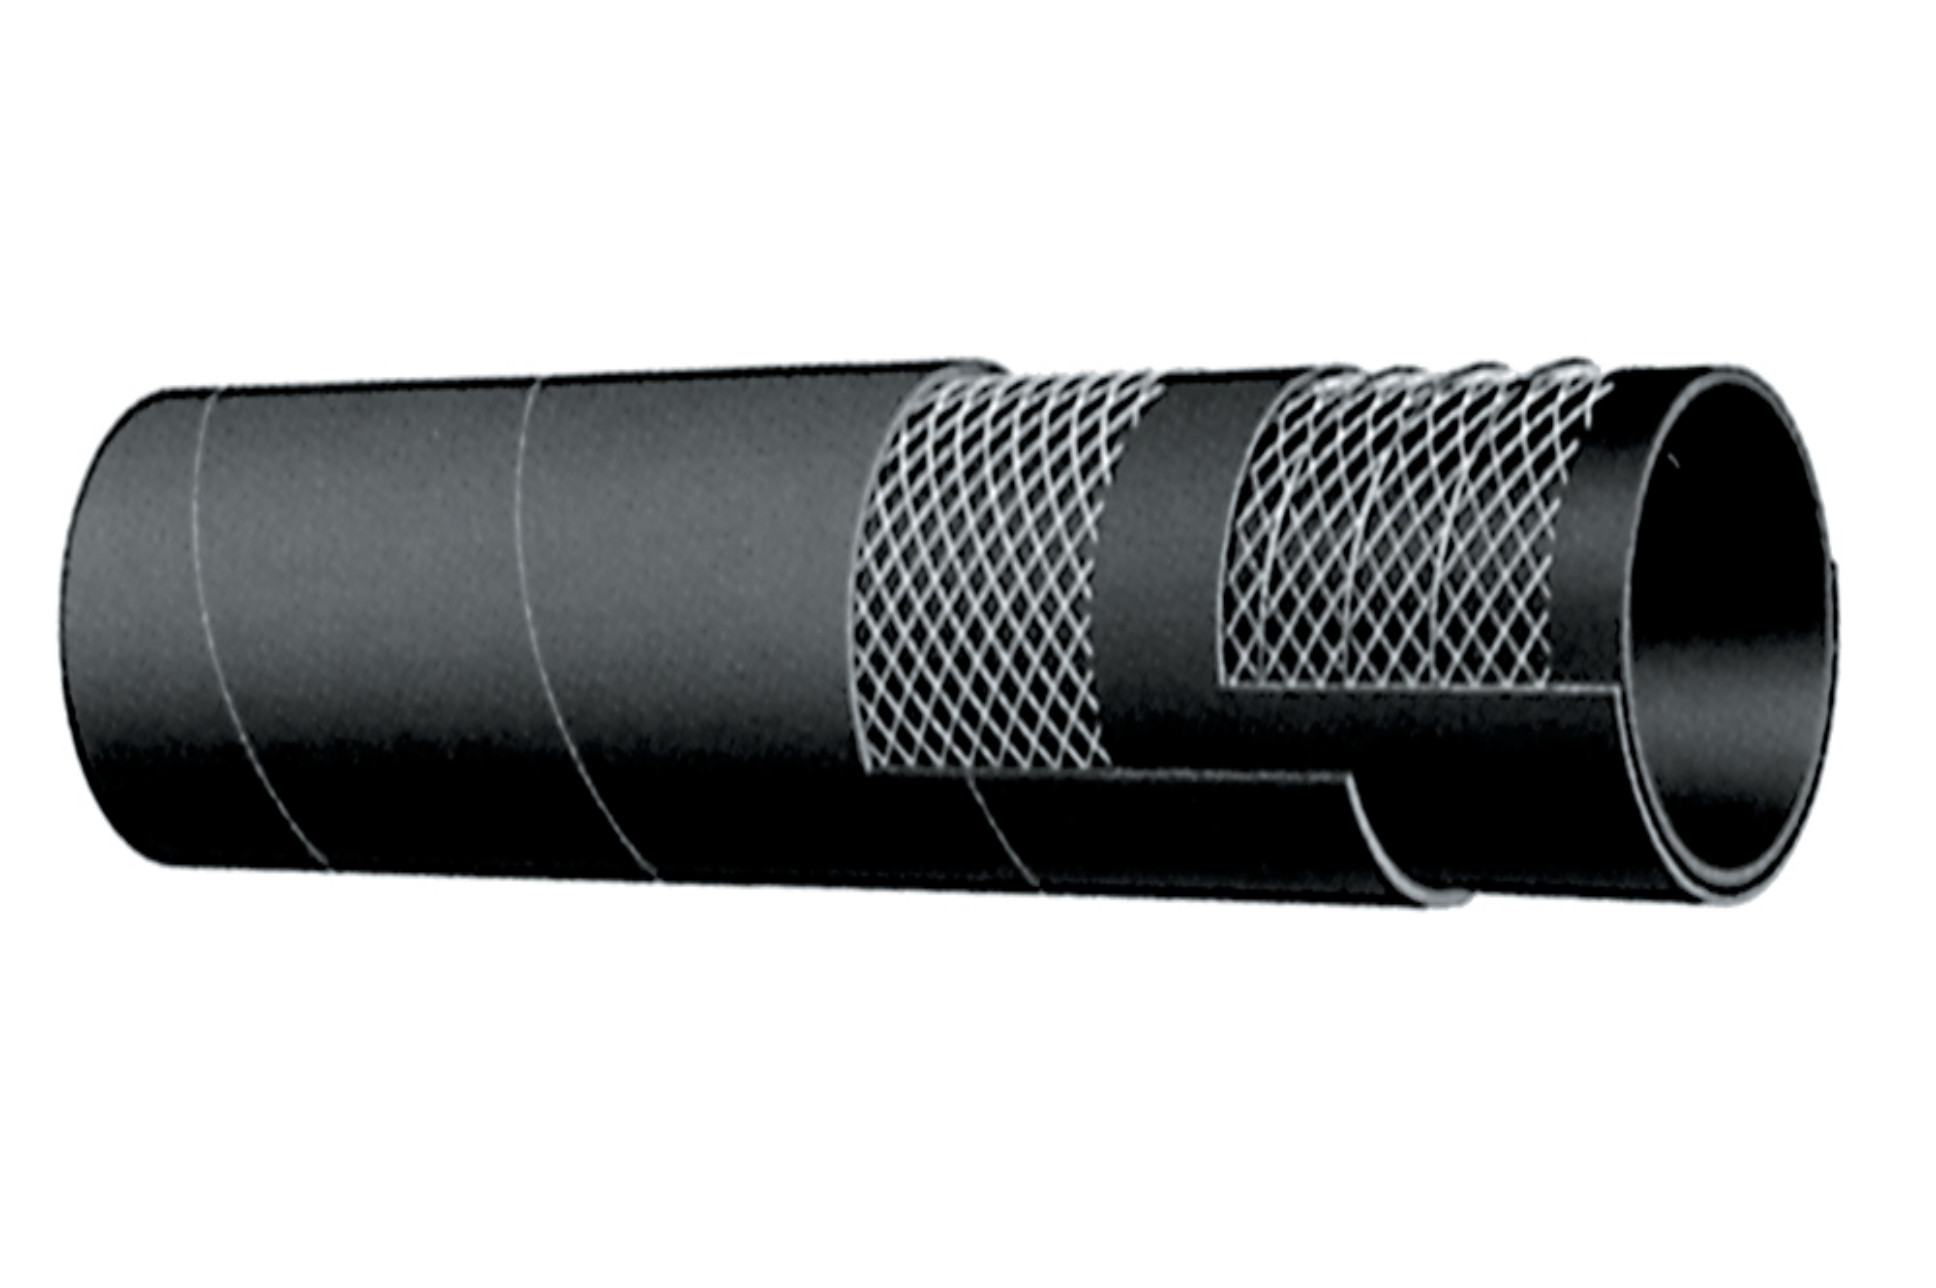 High Pressure Water Discharge Hose - Cut and Couple